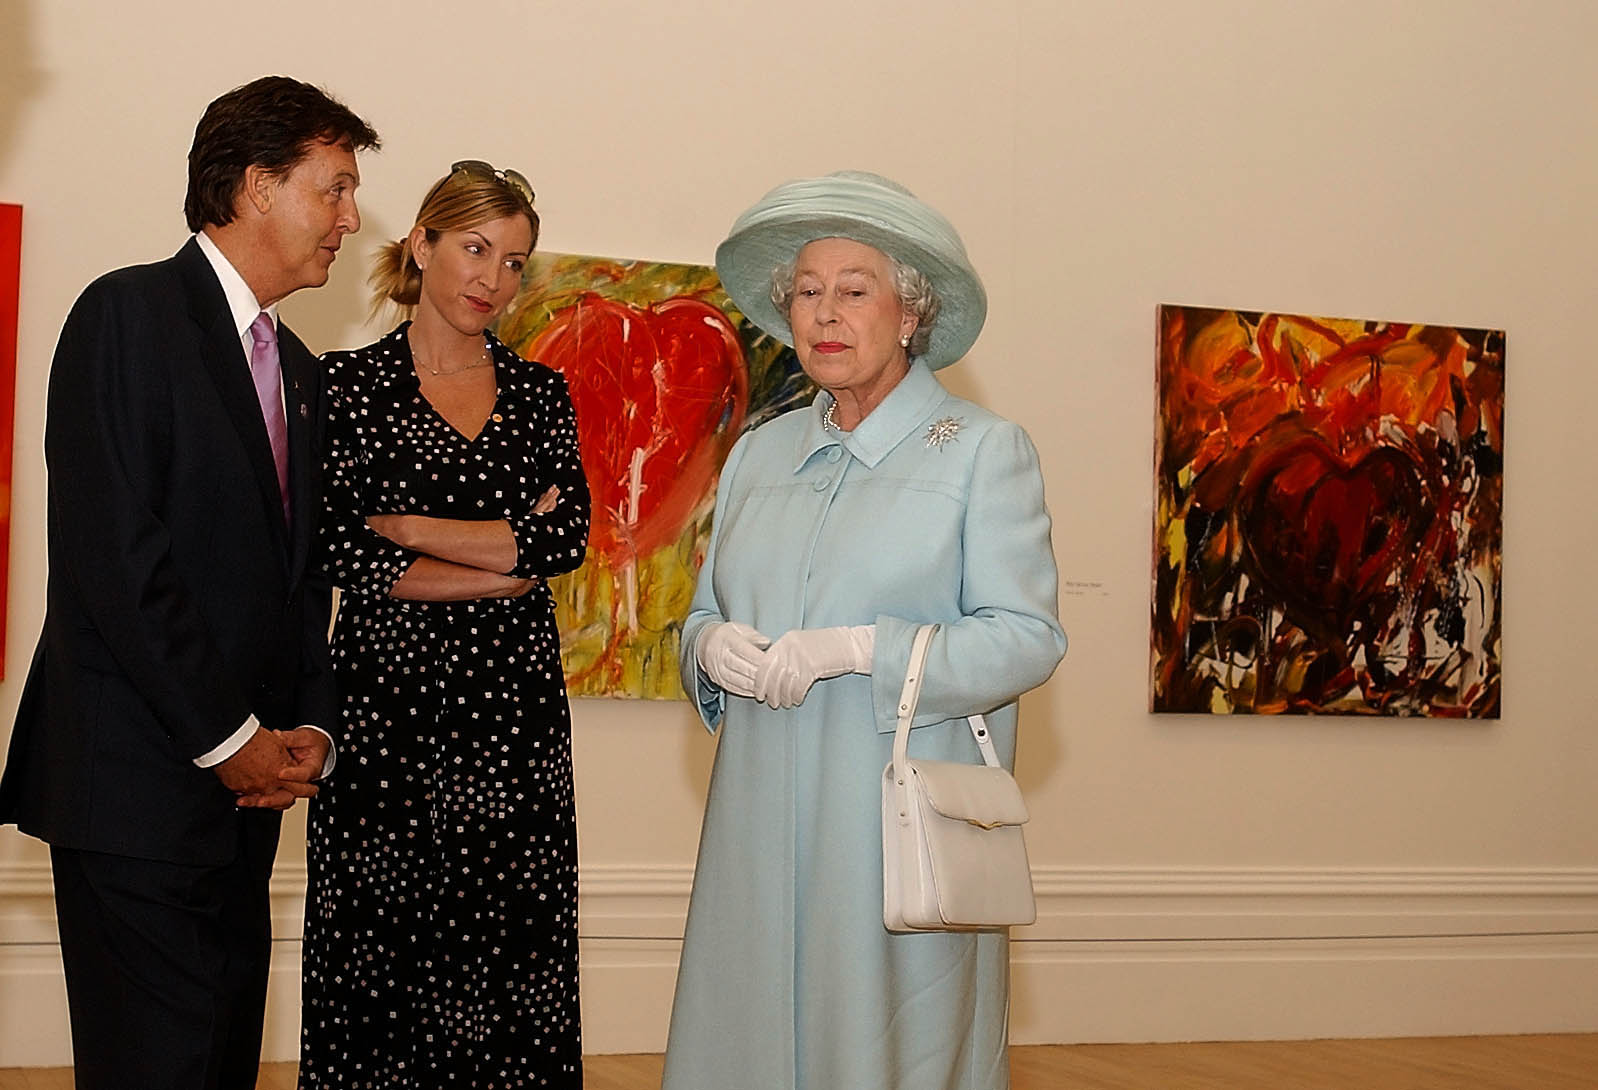 Paul McCartney and Heather Mills converse with Queen Elizabeth ll at the Walker Art Gallery on July 25, 2002 in Liverpoool, England | Source: Getty Images